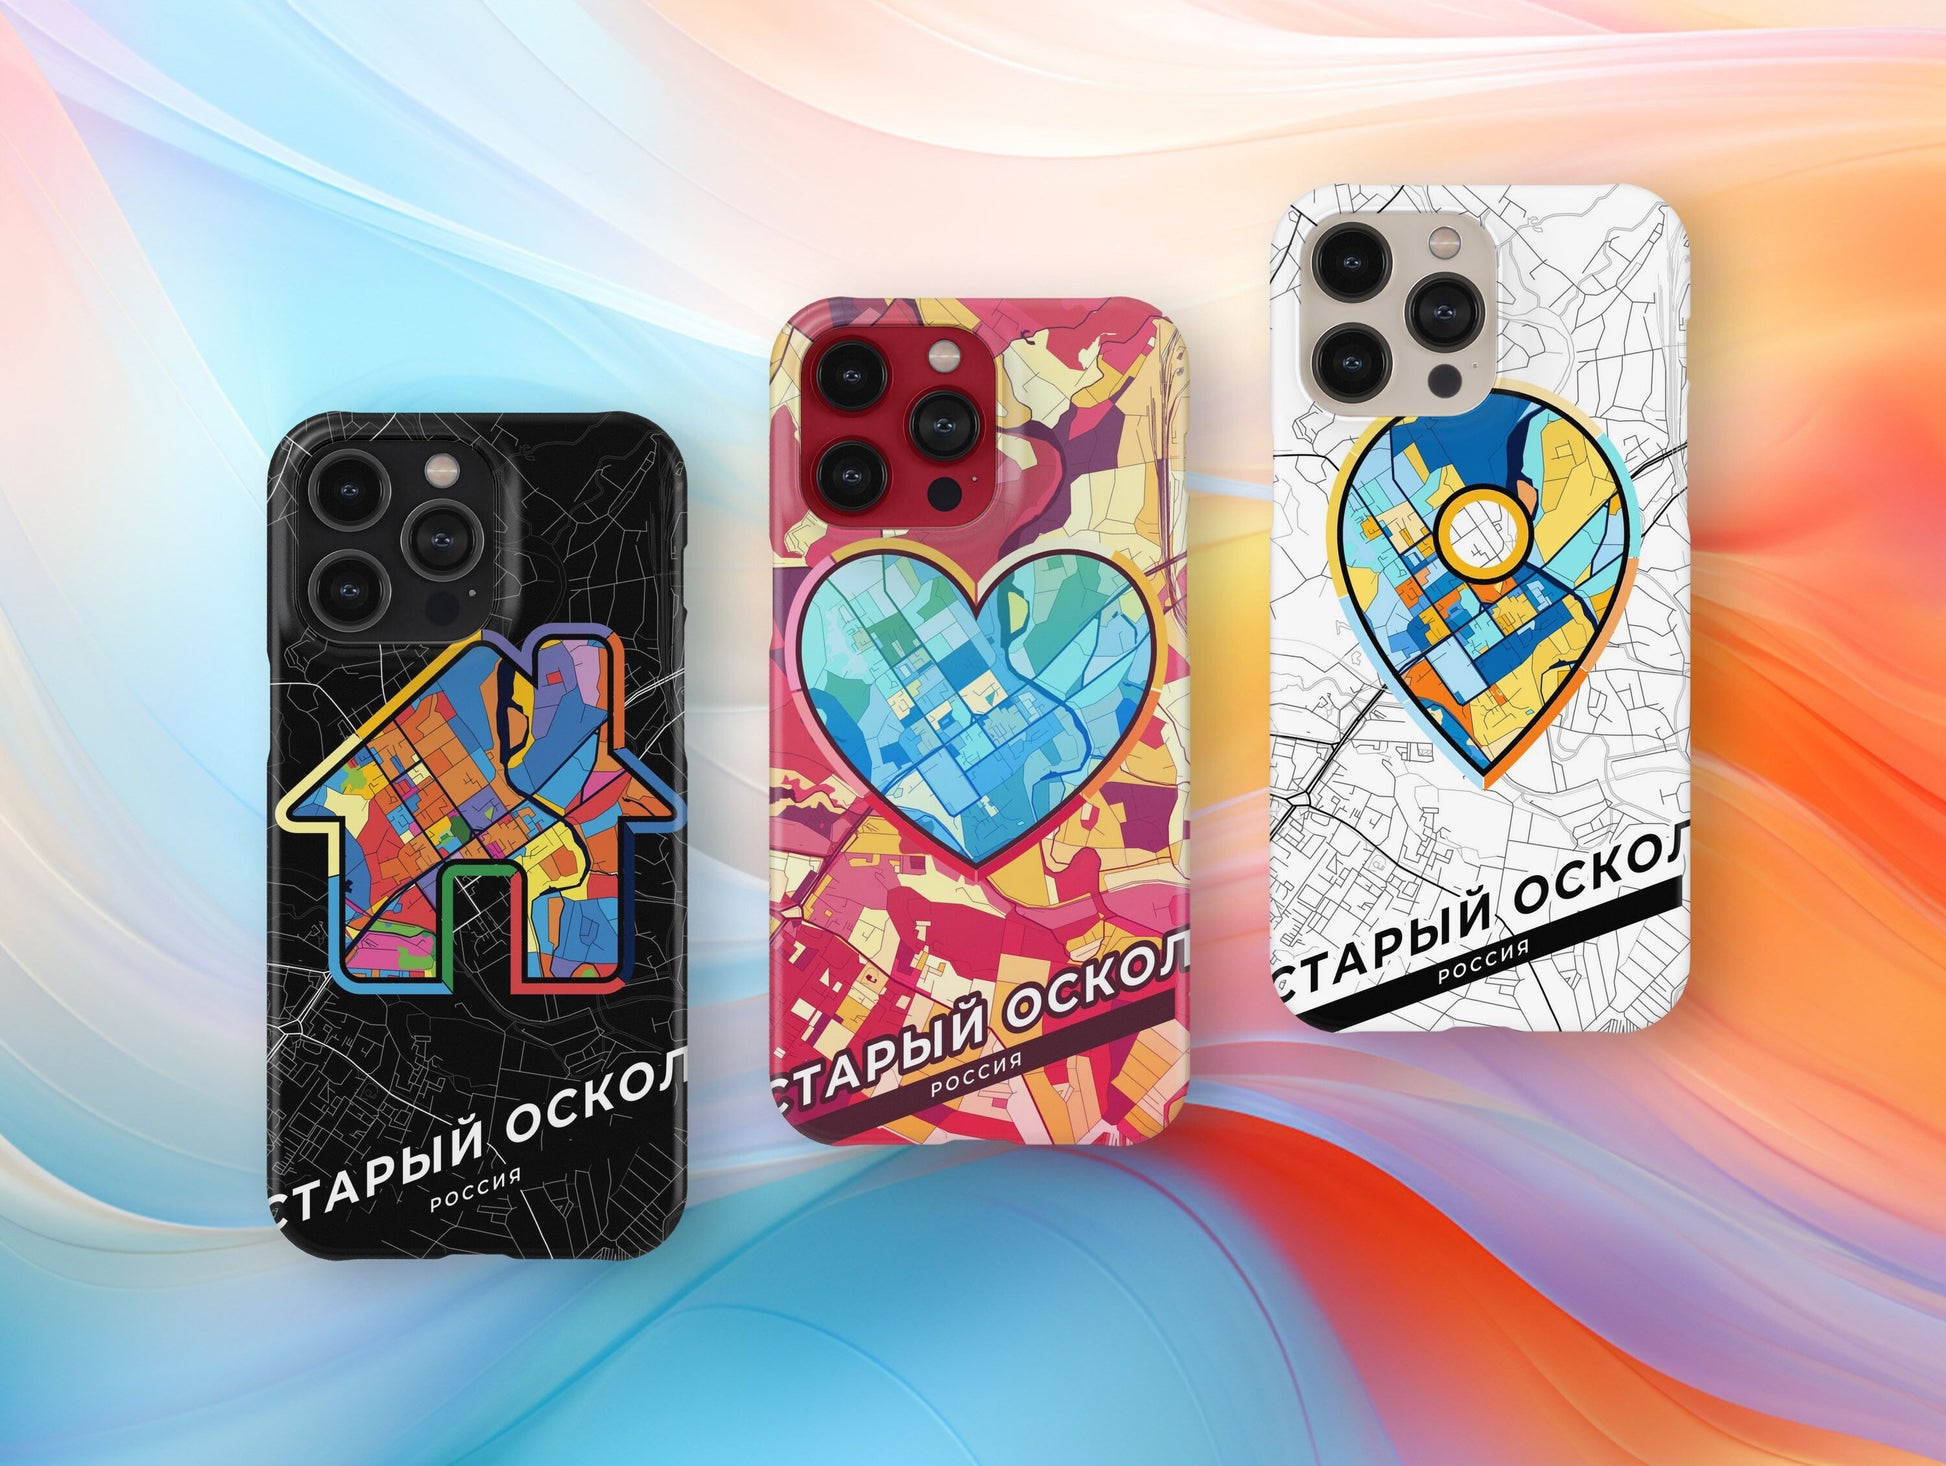 Stary Oskol Russia slim phone case with colorful icon